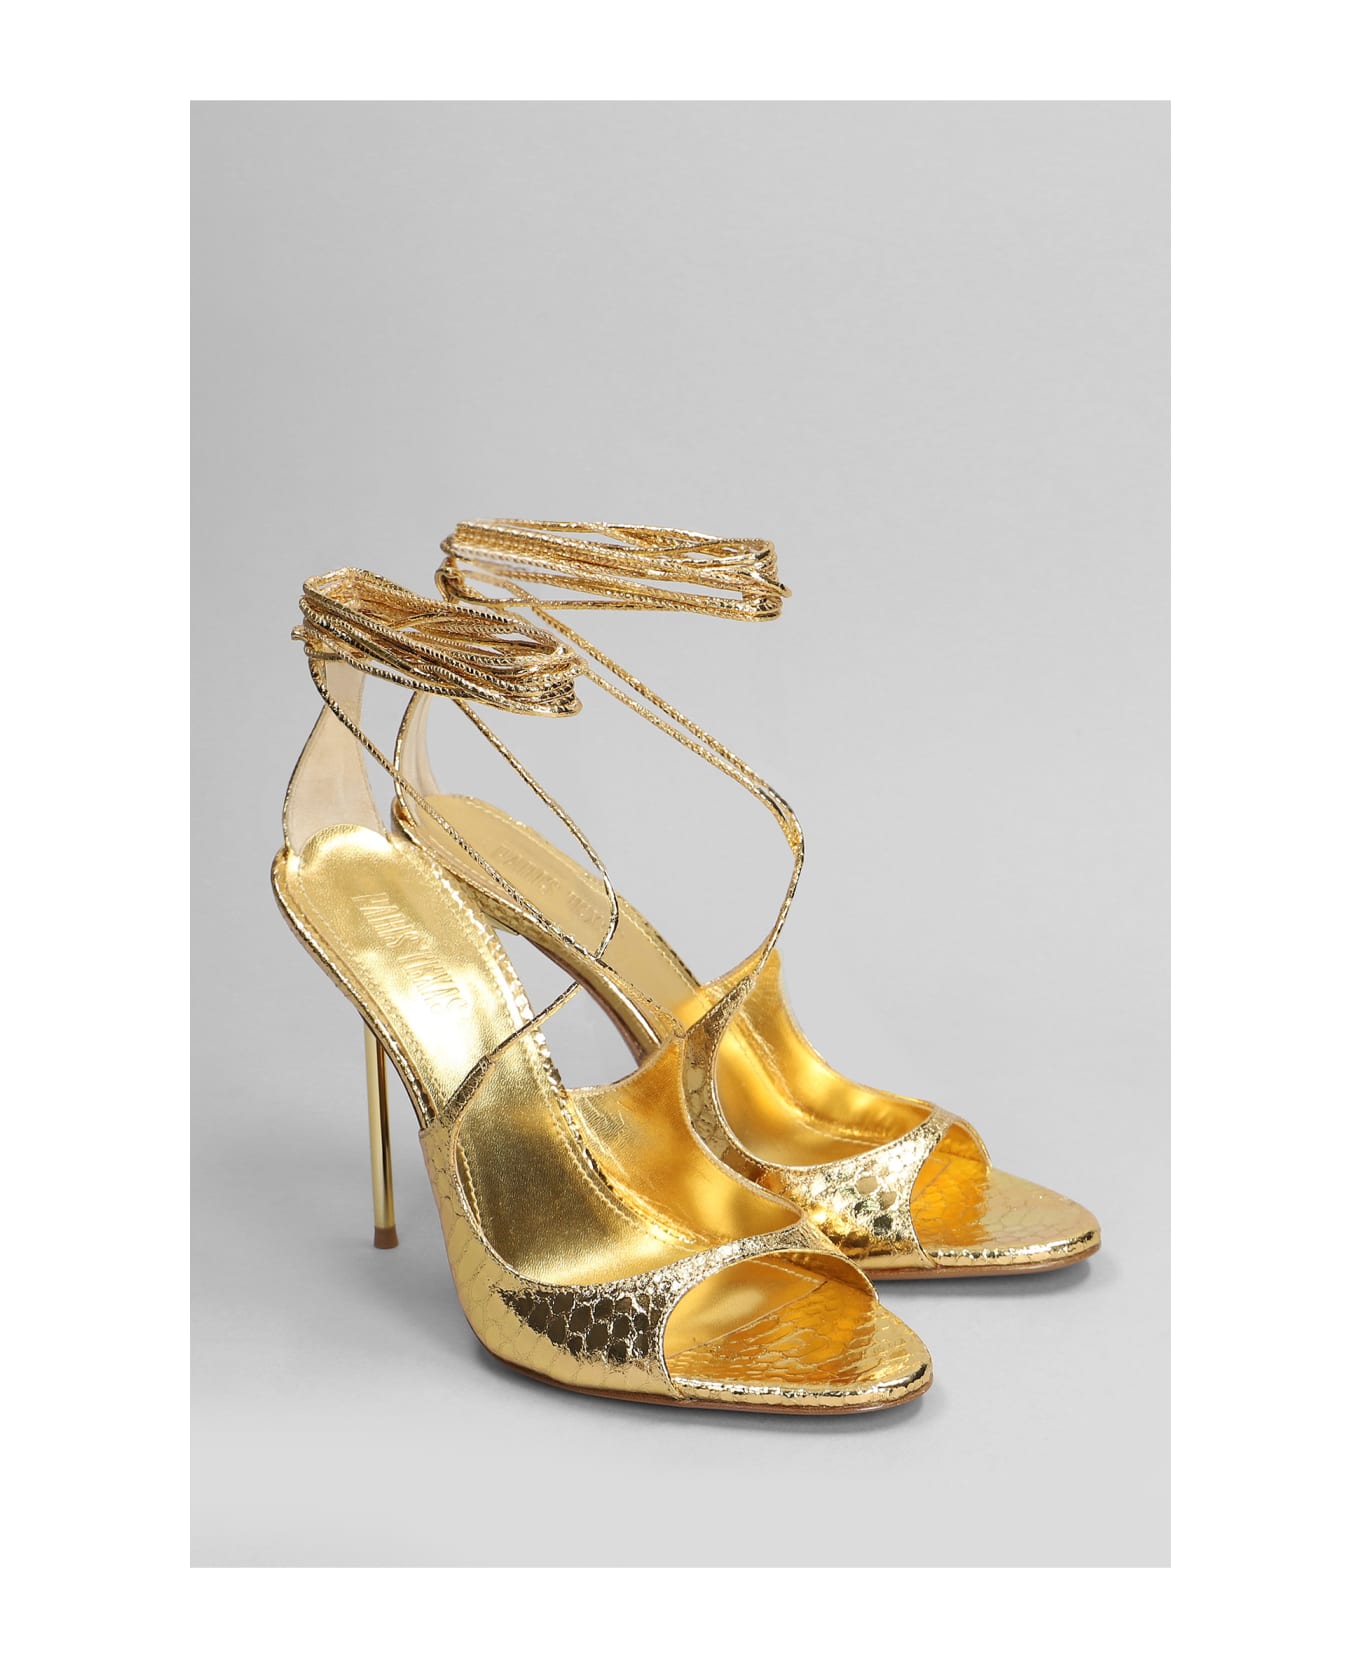 Paris Texas Loulou Sandals In Gold Leather - gold